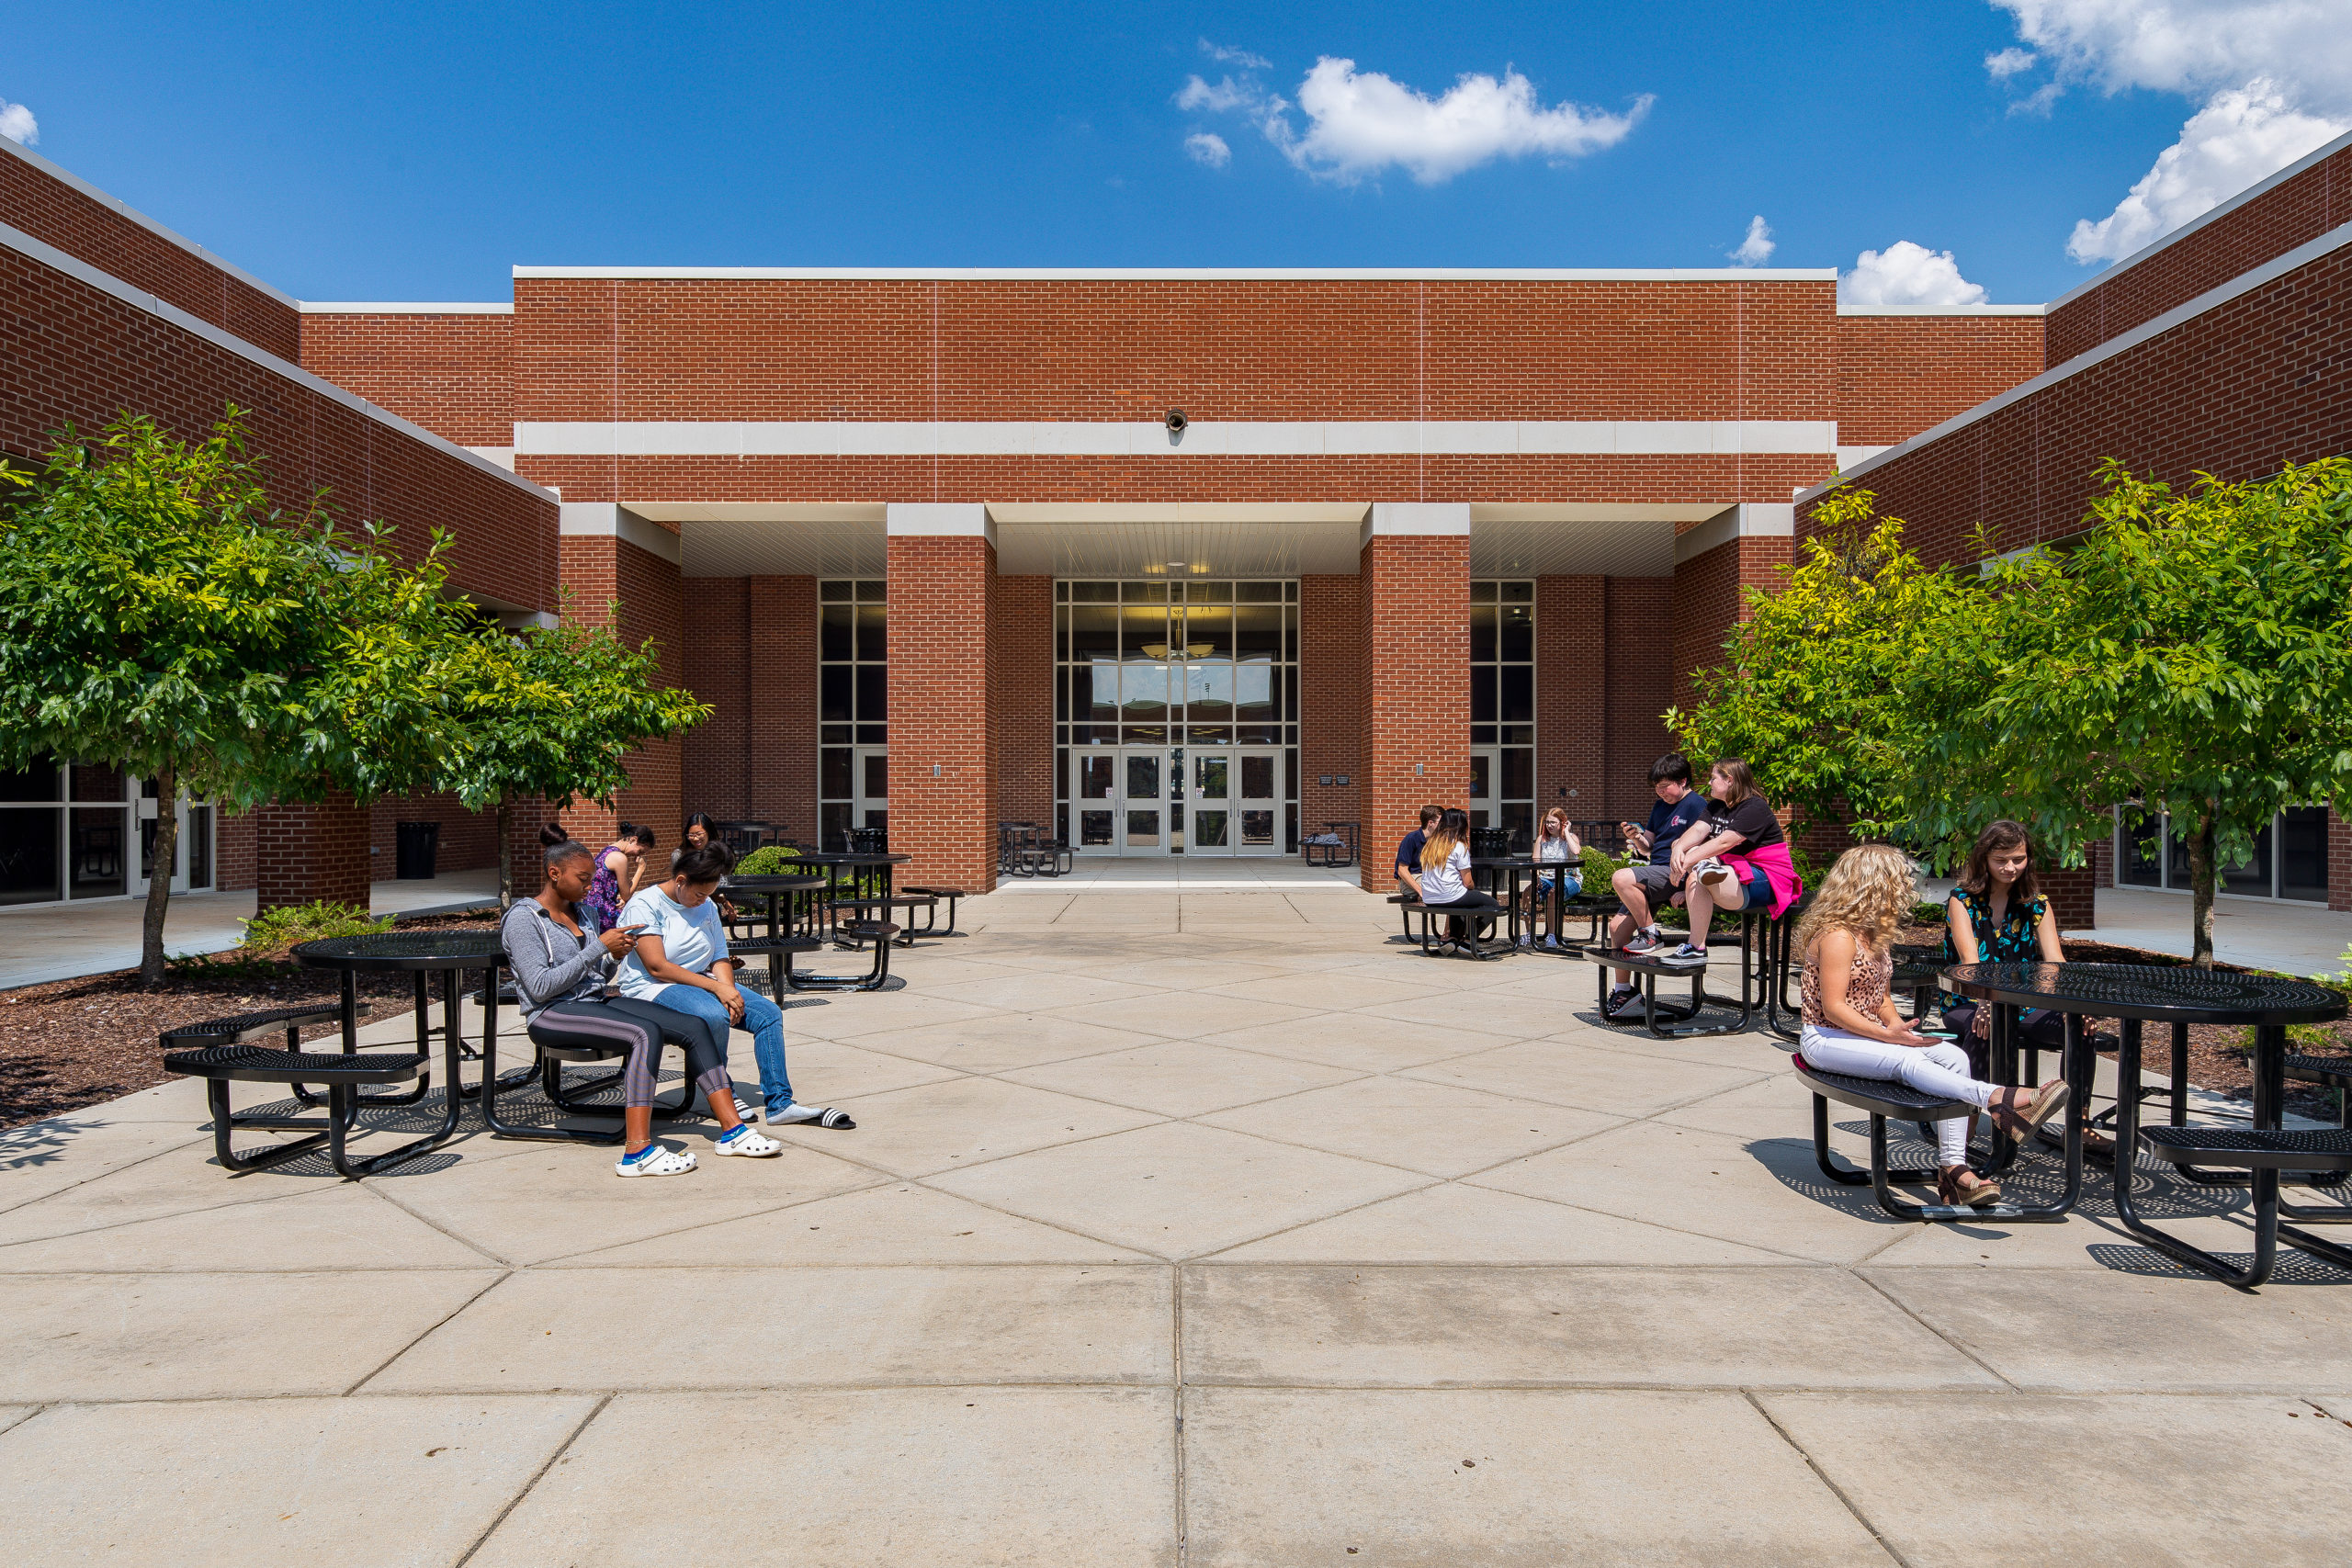 patio area at james clemson high school with picnic tables